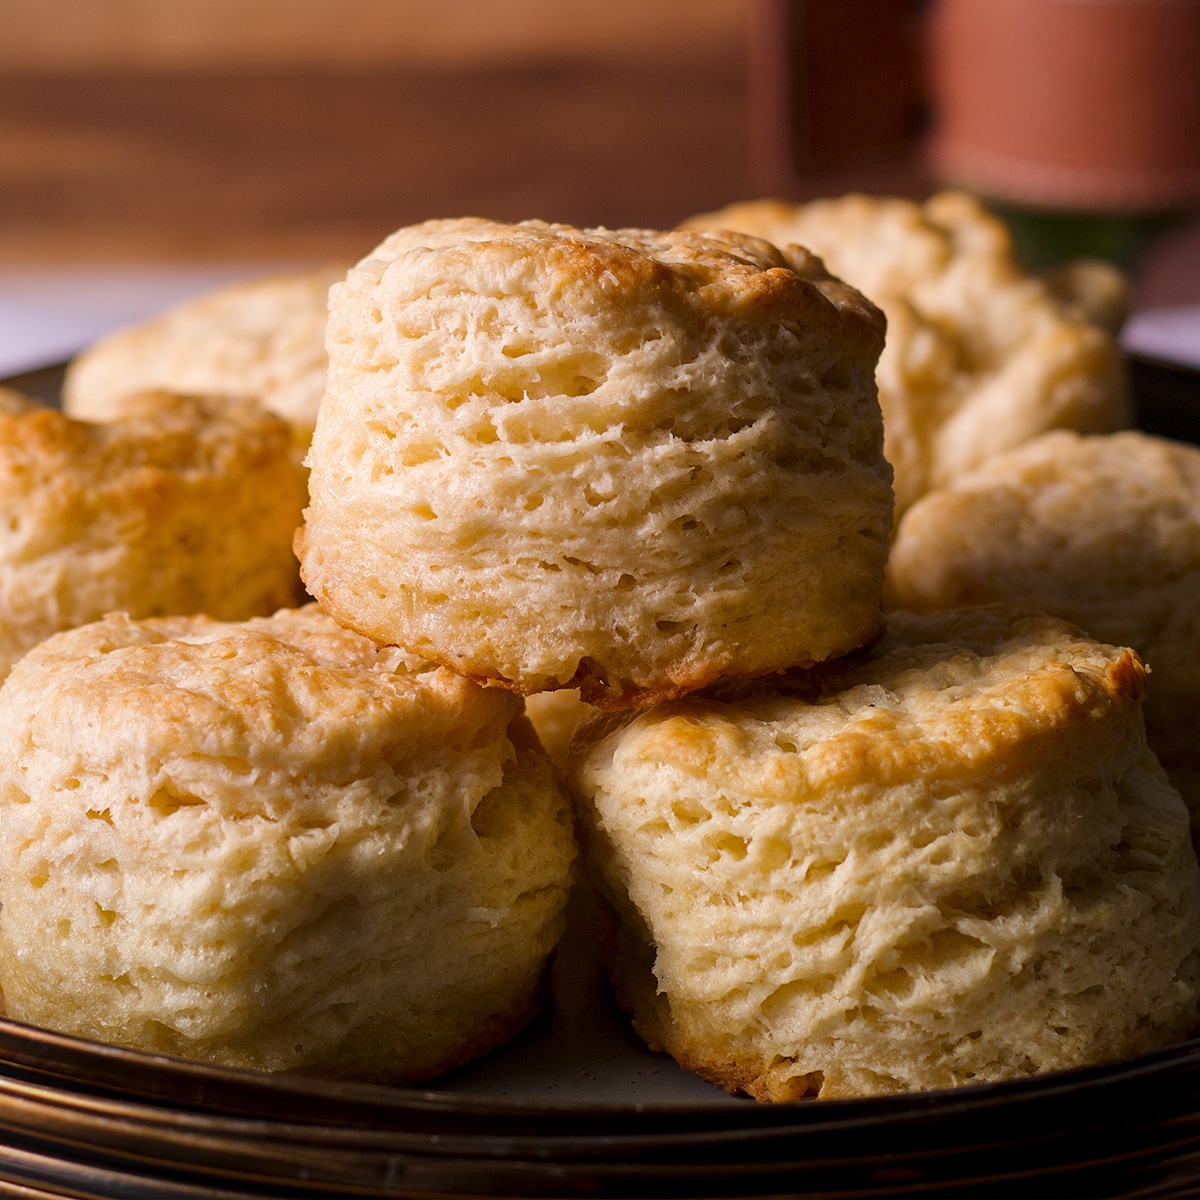 A plate piled high with warm homemade buttermilk biscuits.